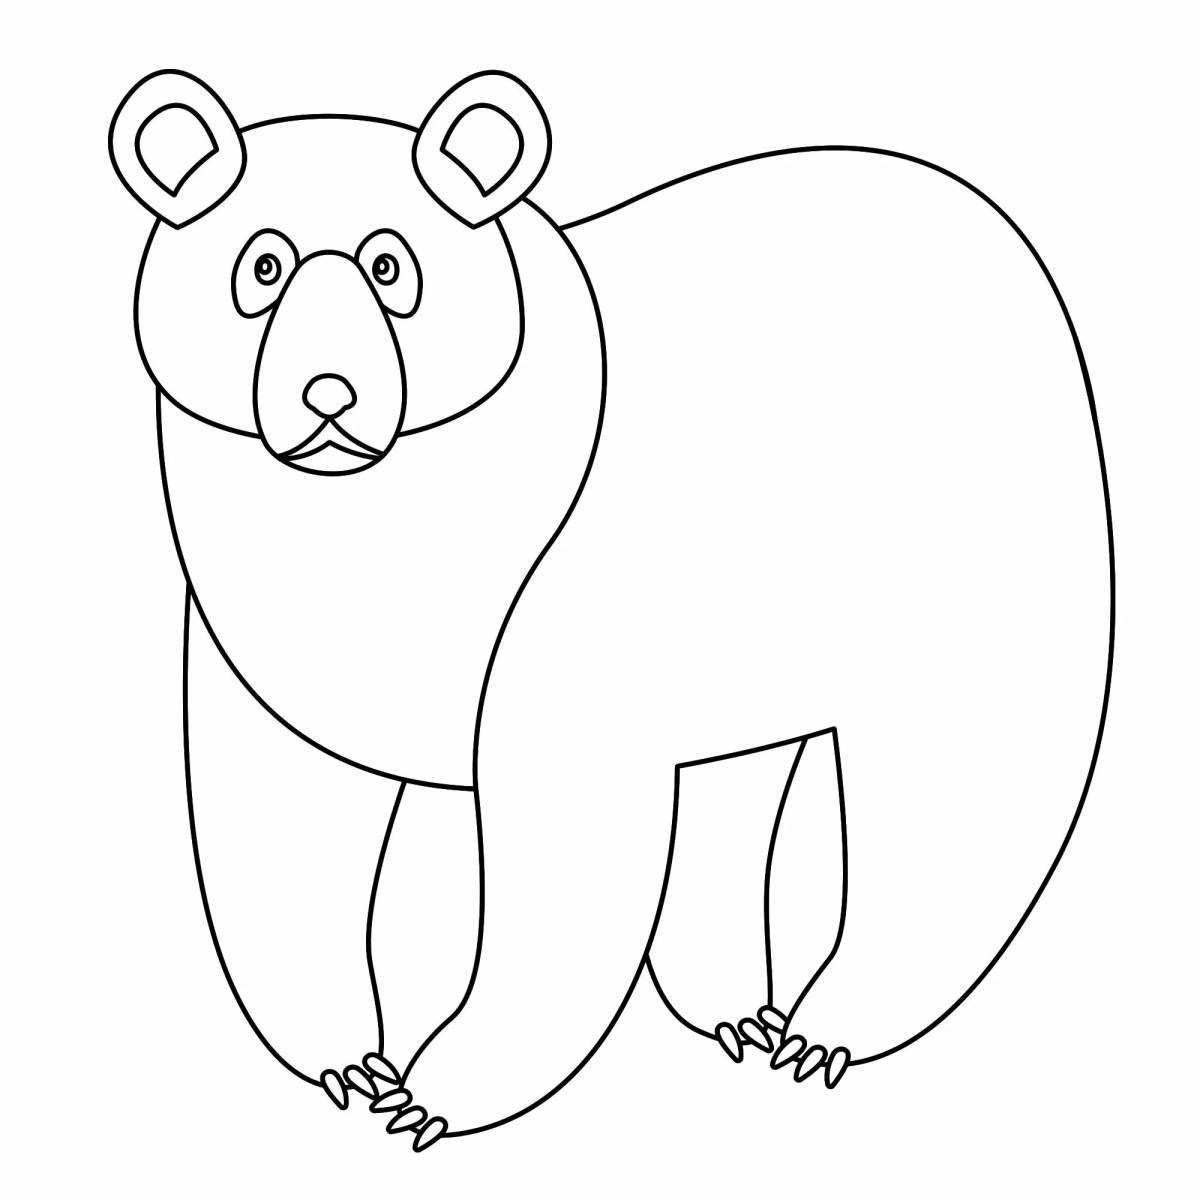 Huggable coloring page clumsy bear